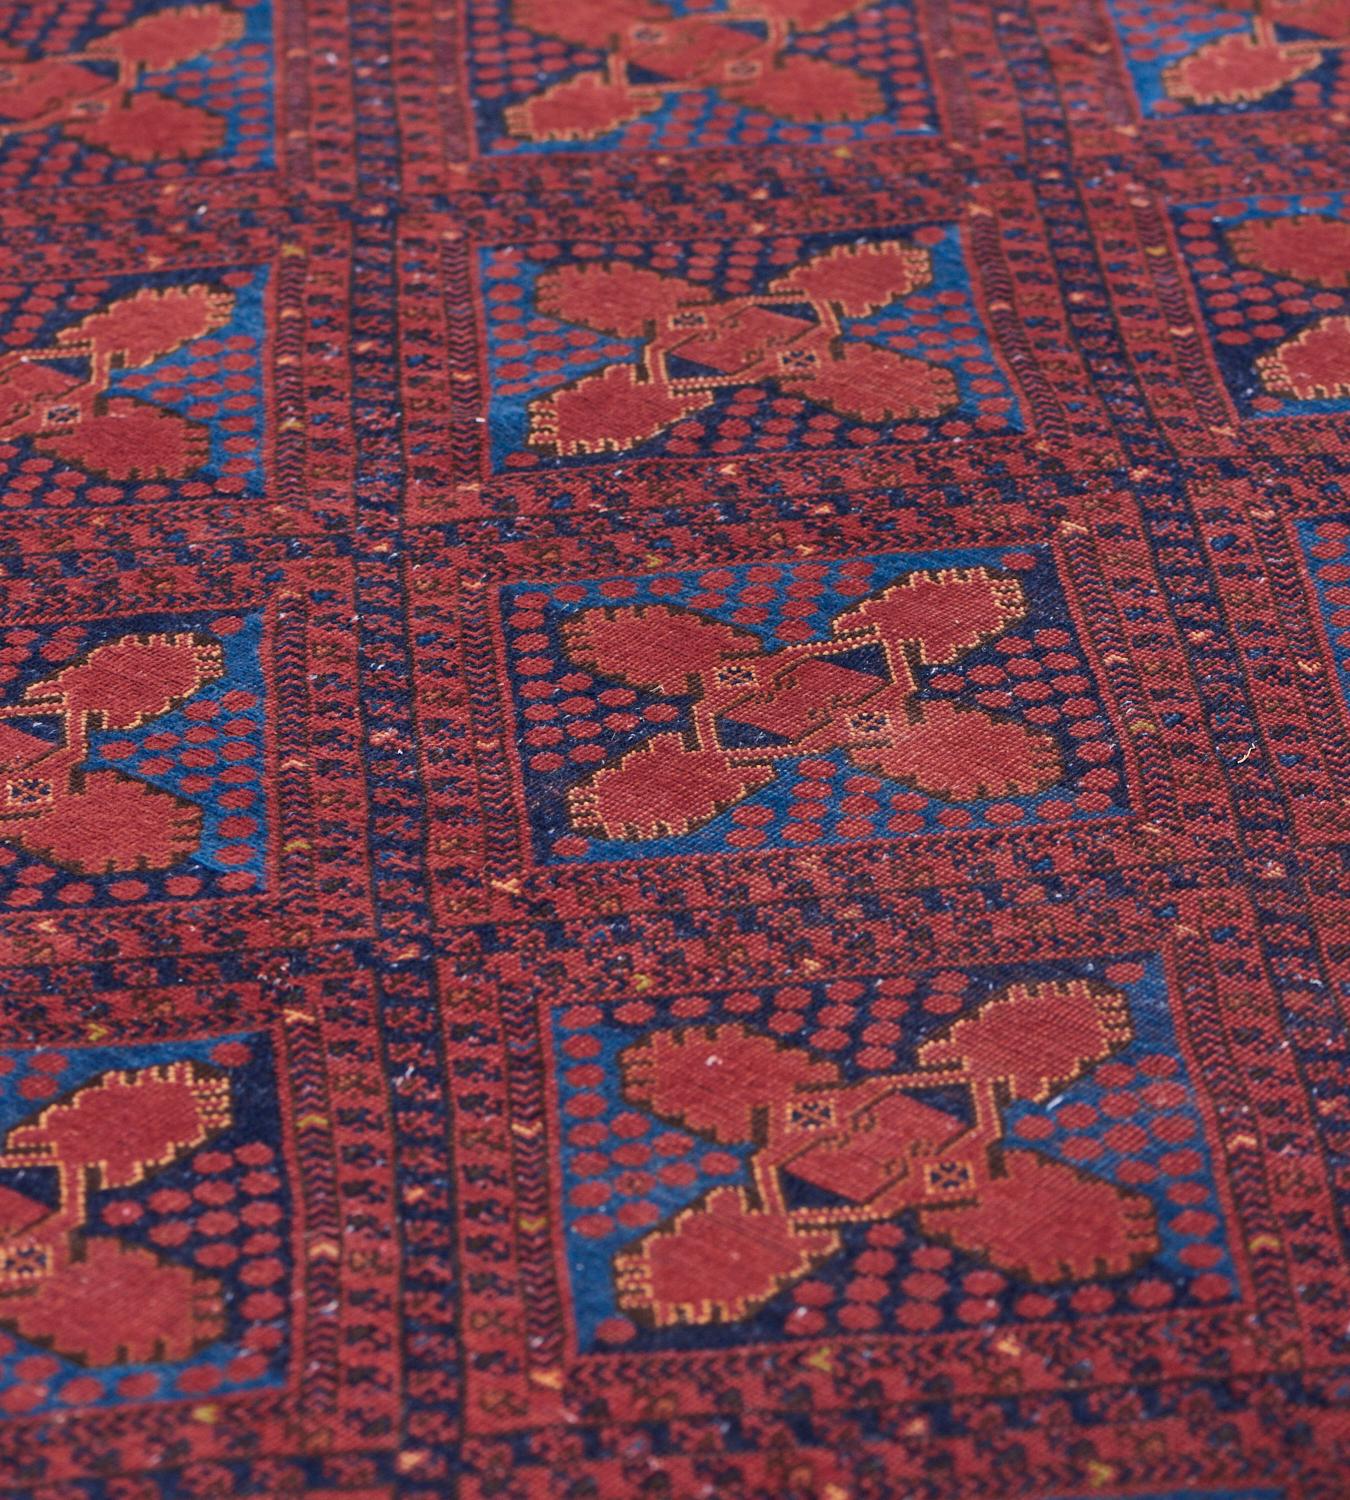 This antique Bokhara rug features a field with diagonal rows of brick-red, shaded blue narrow floral and chevron-pattern stripes around shaded blue and light blue lozenge medallions with a central brick-red X-motif surrounded by brick-red dots, in a